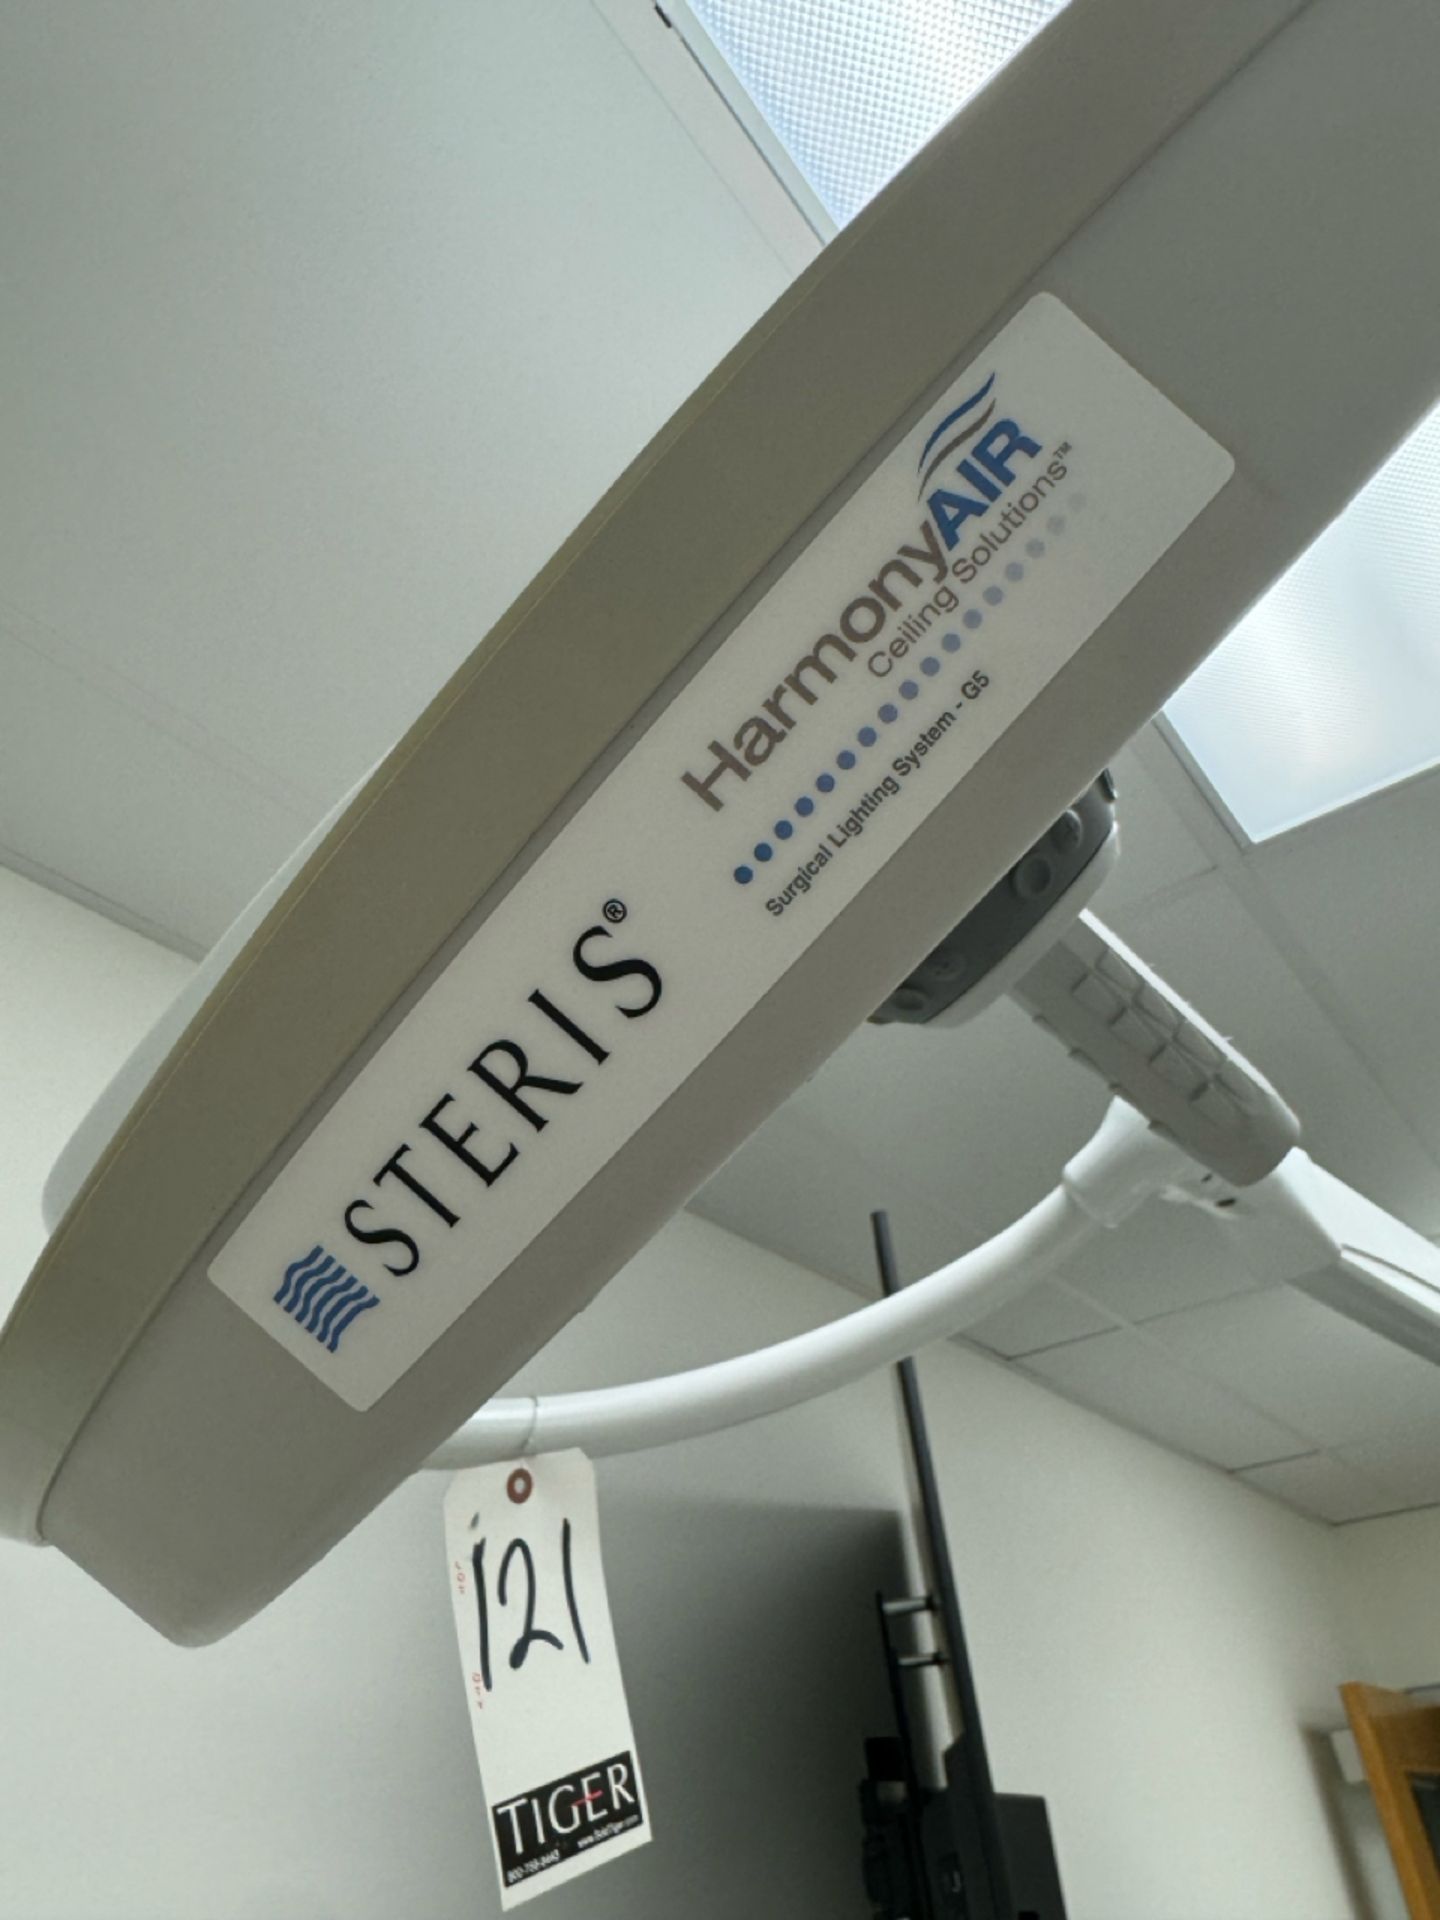 Steris Surgical Lighting System - Image 3 of 6